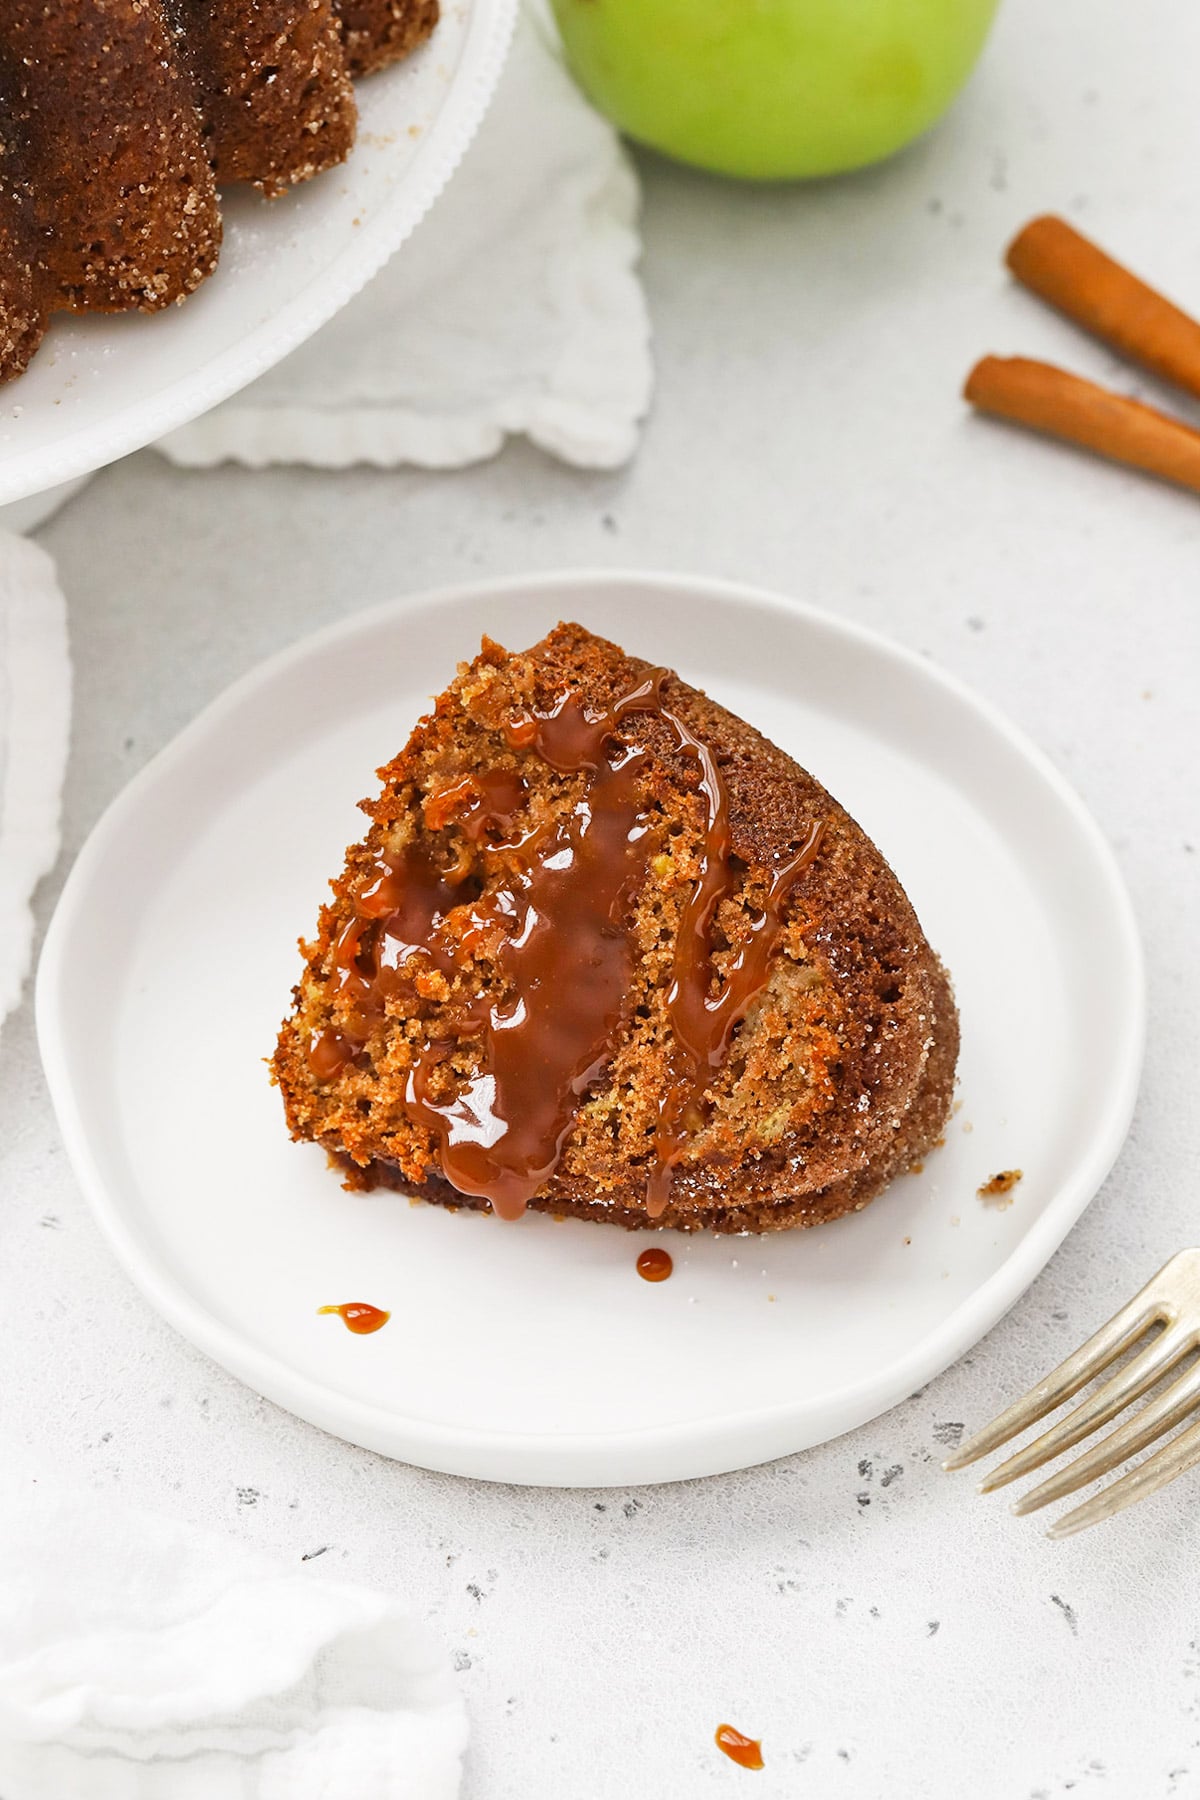 A slice of gluten-free apple spice bundt cake with caramel sauce drizzed on top